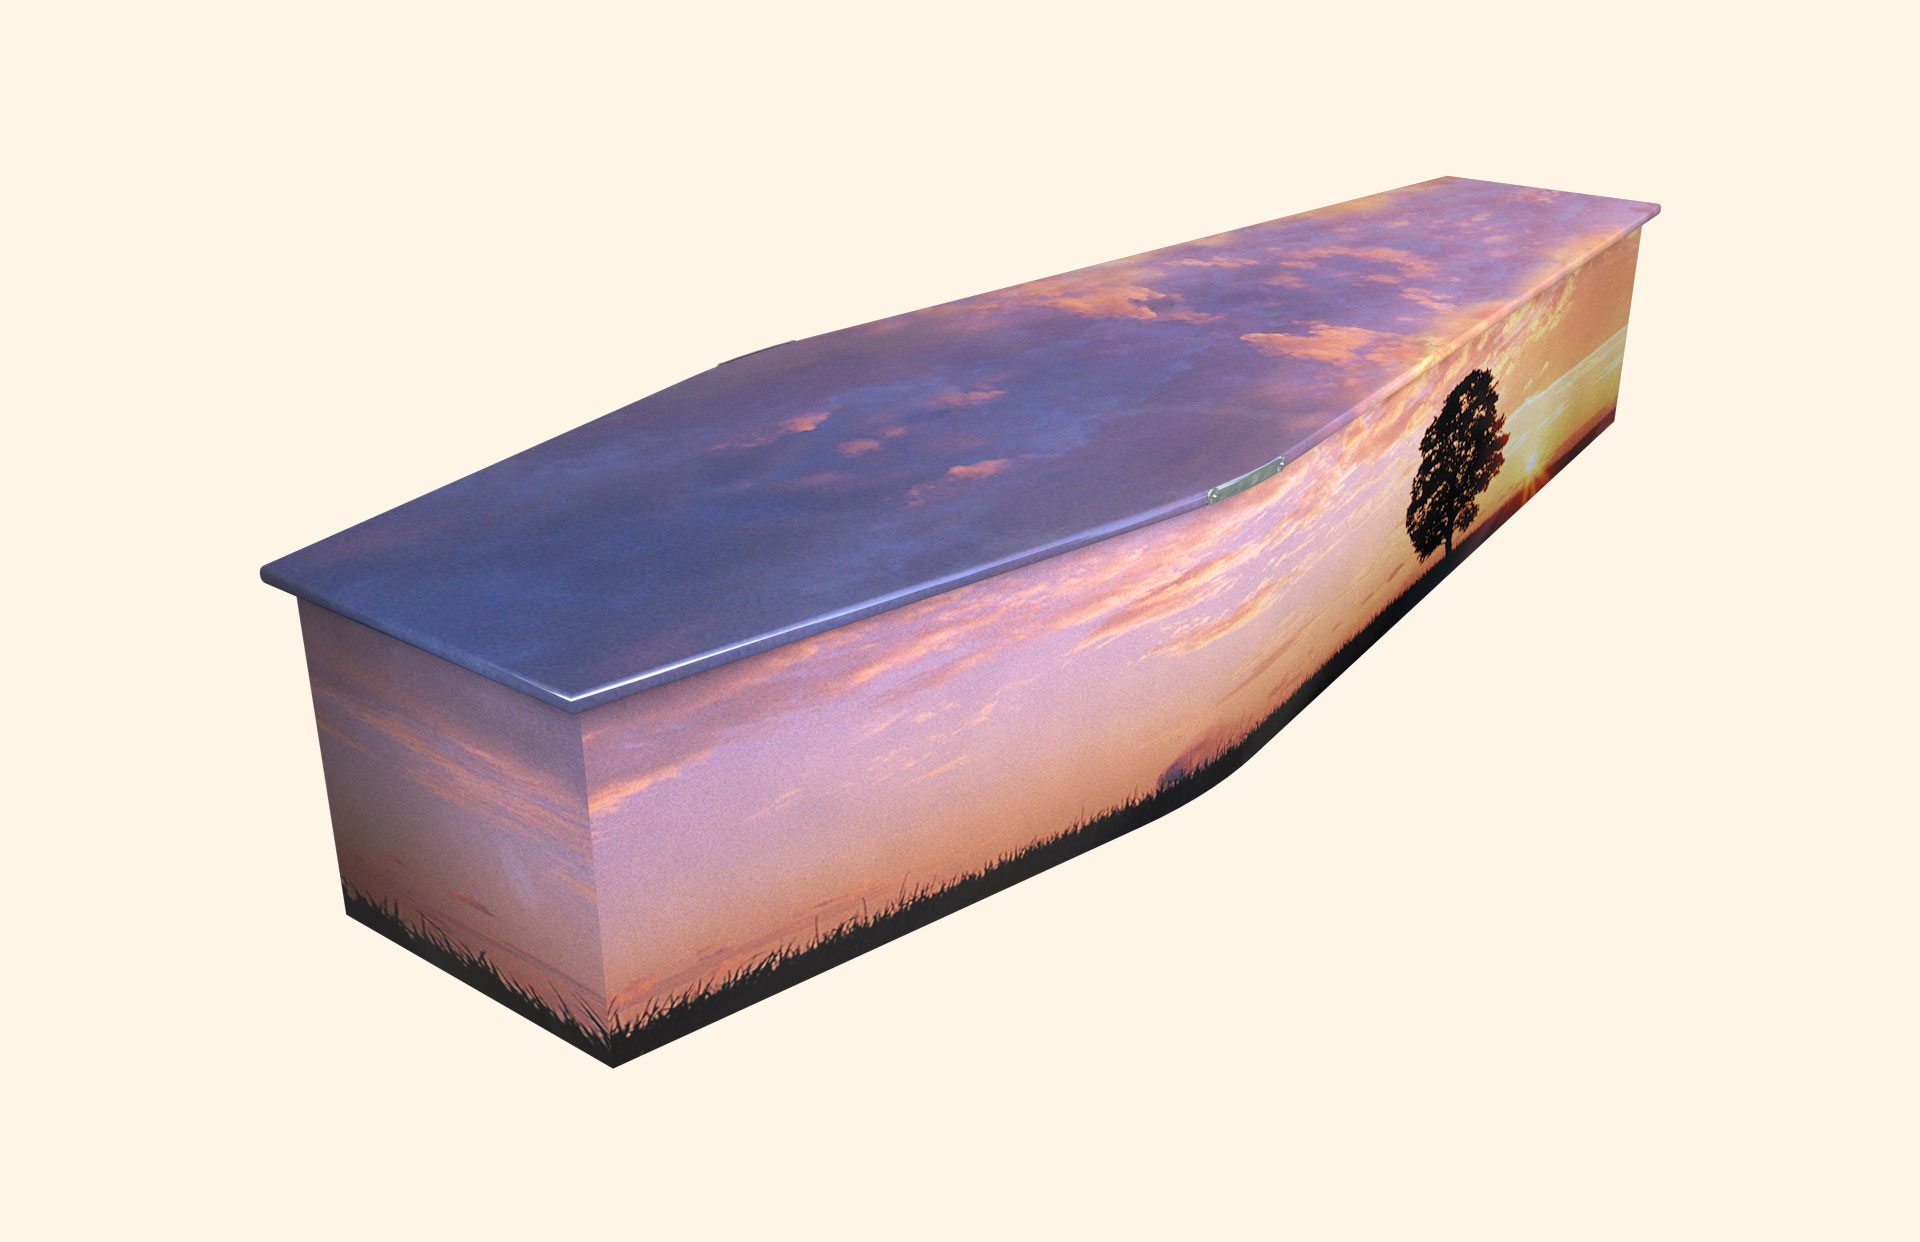 Sunset design on a traditional coffin